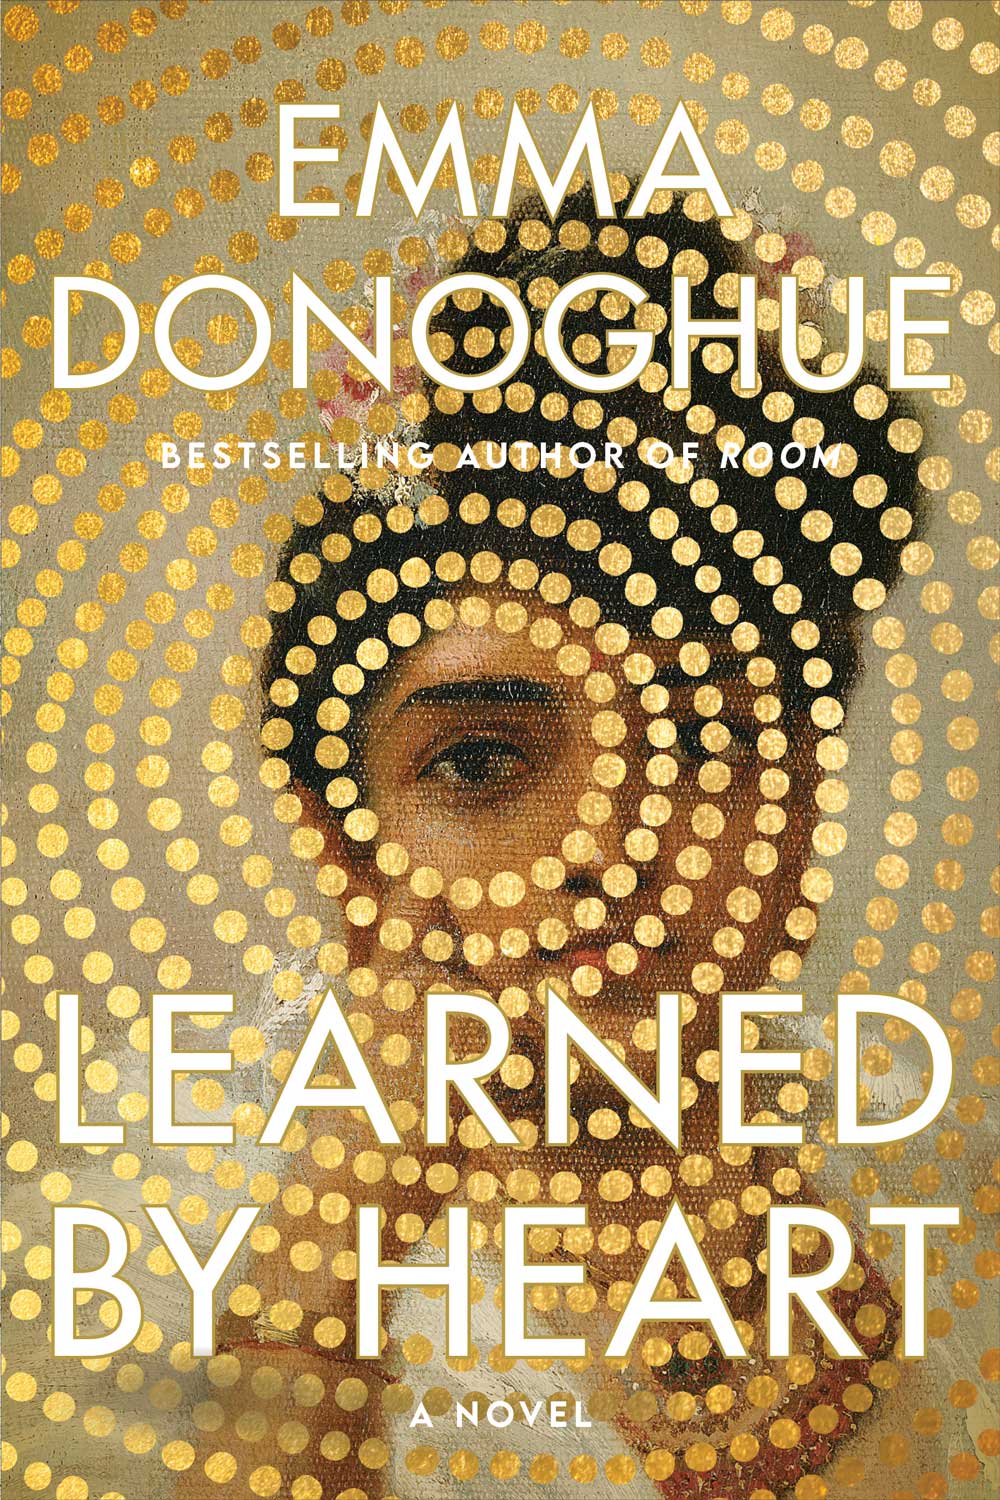 Book cover for Learned. An image of a woman's face under a circle pattern of gold dots that frames the woman's eye in the centre.